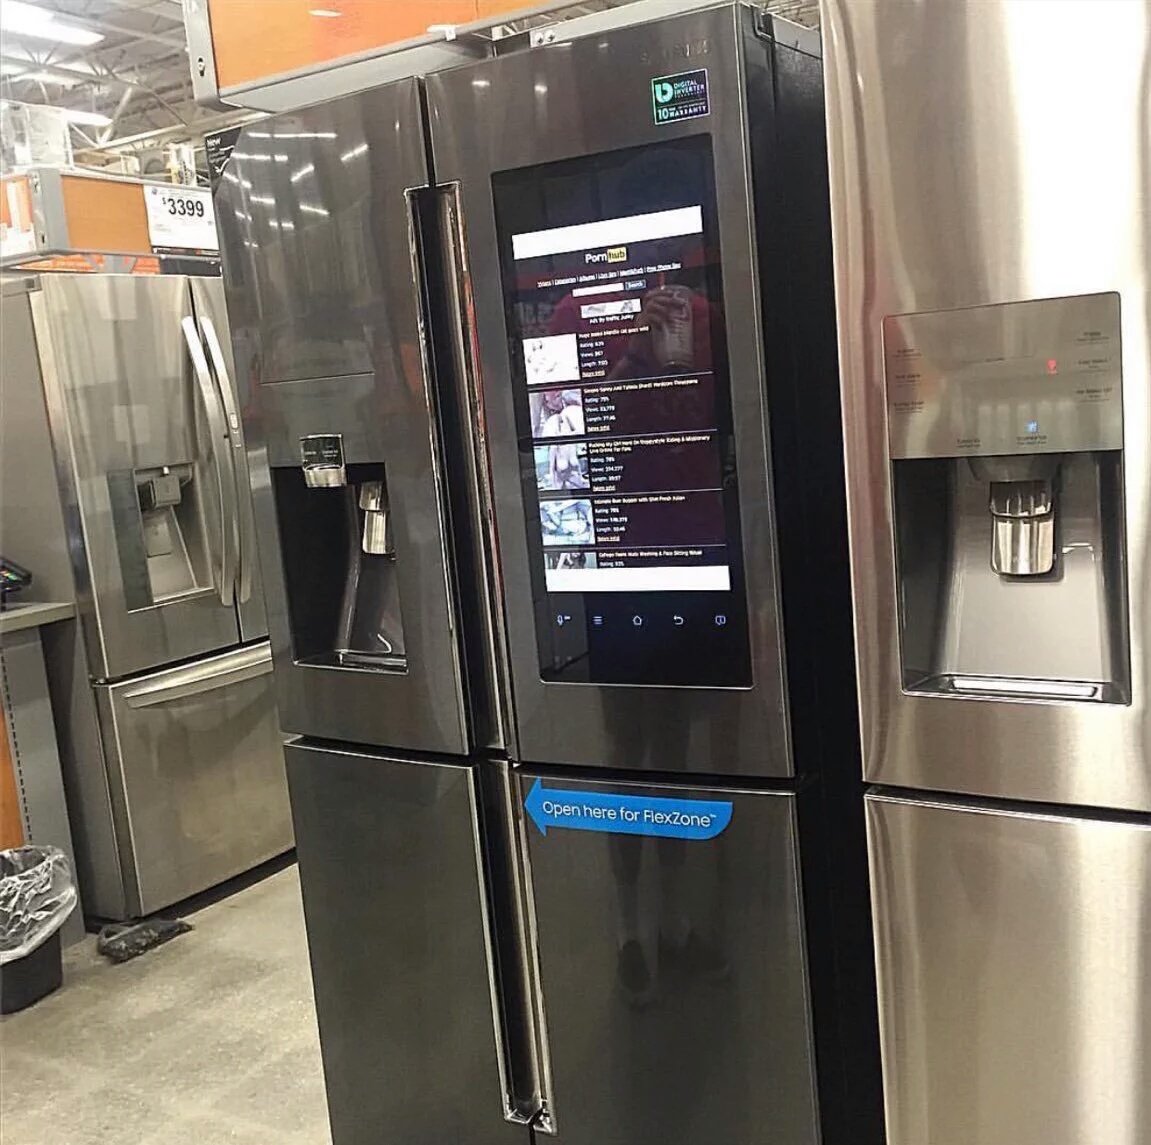 Pornhub on a refrigerator in Home Depot / Boing Boing